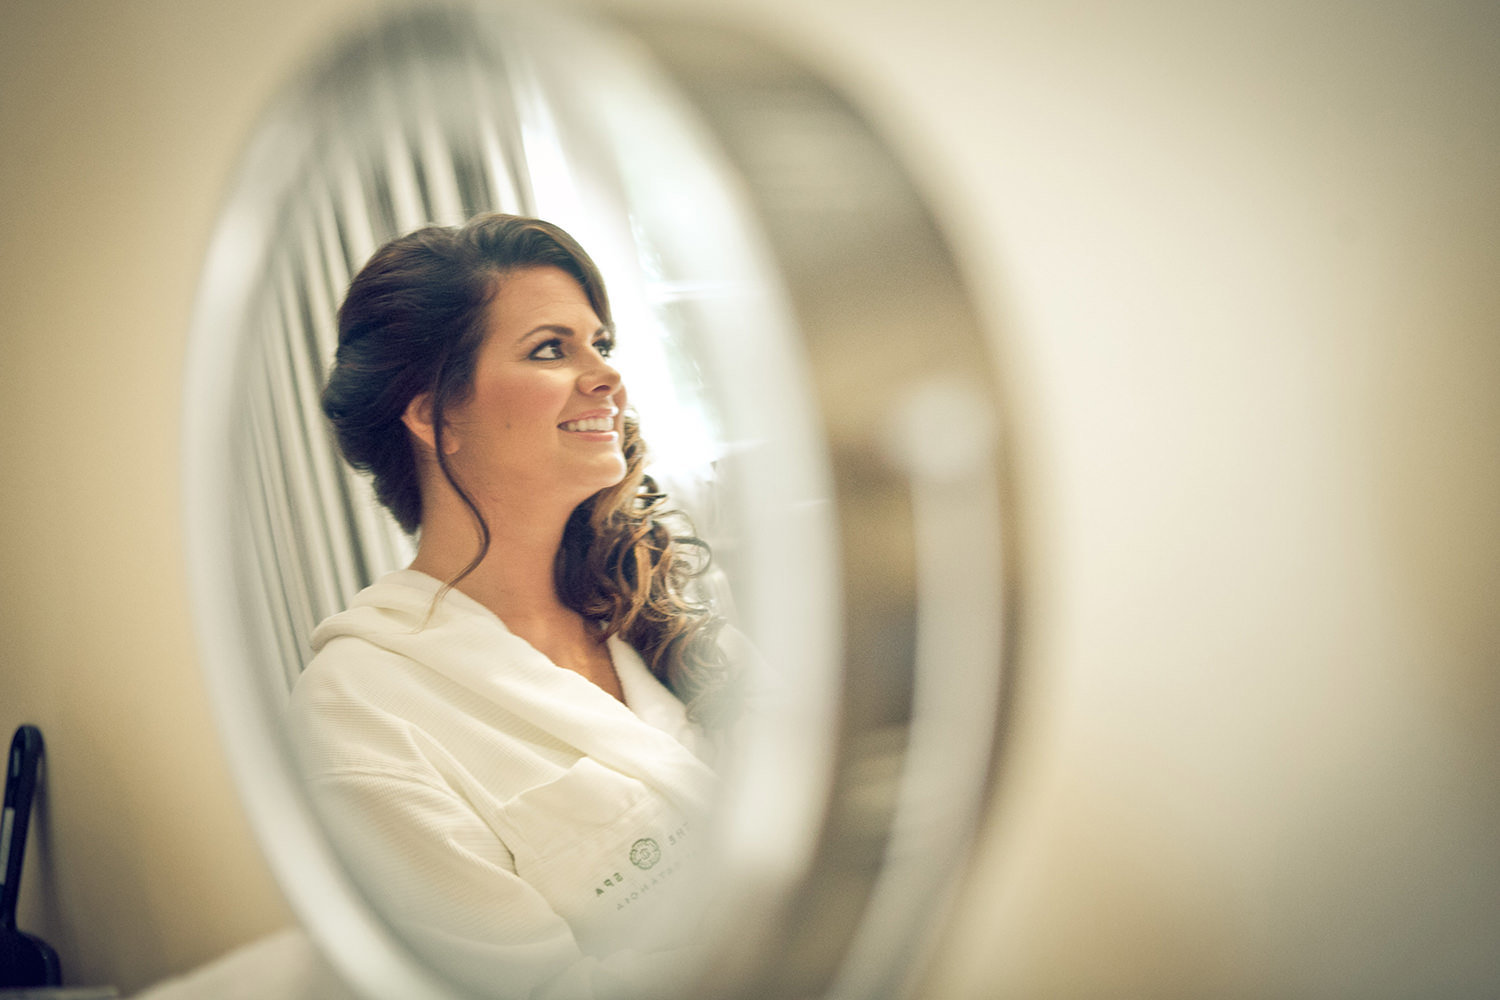 Framing the bride in the mirror